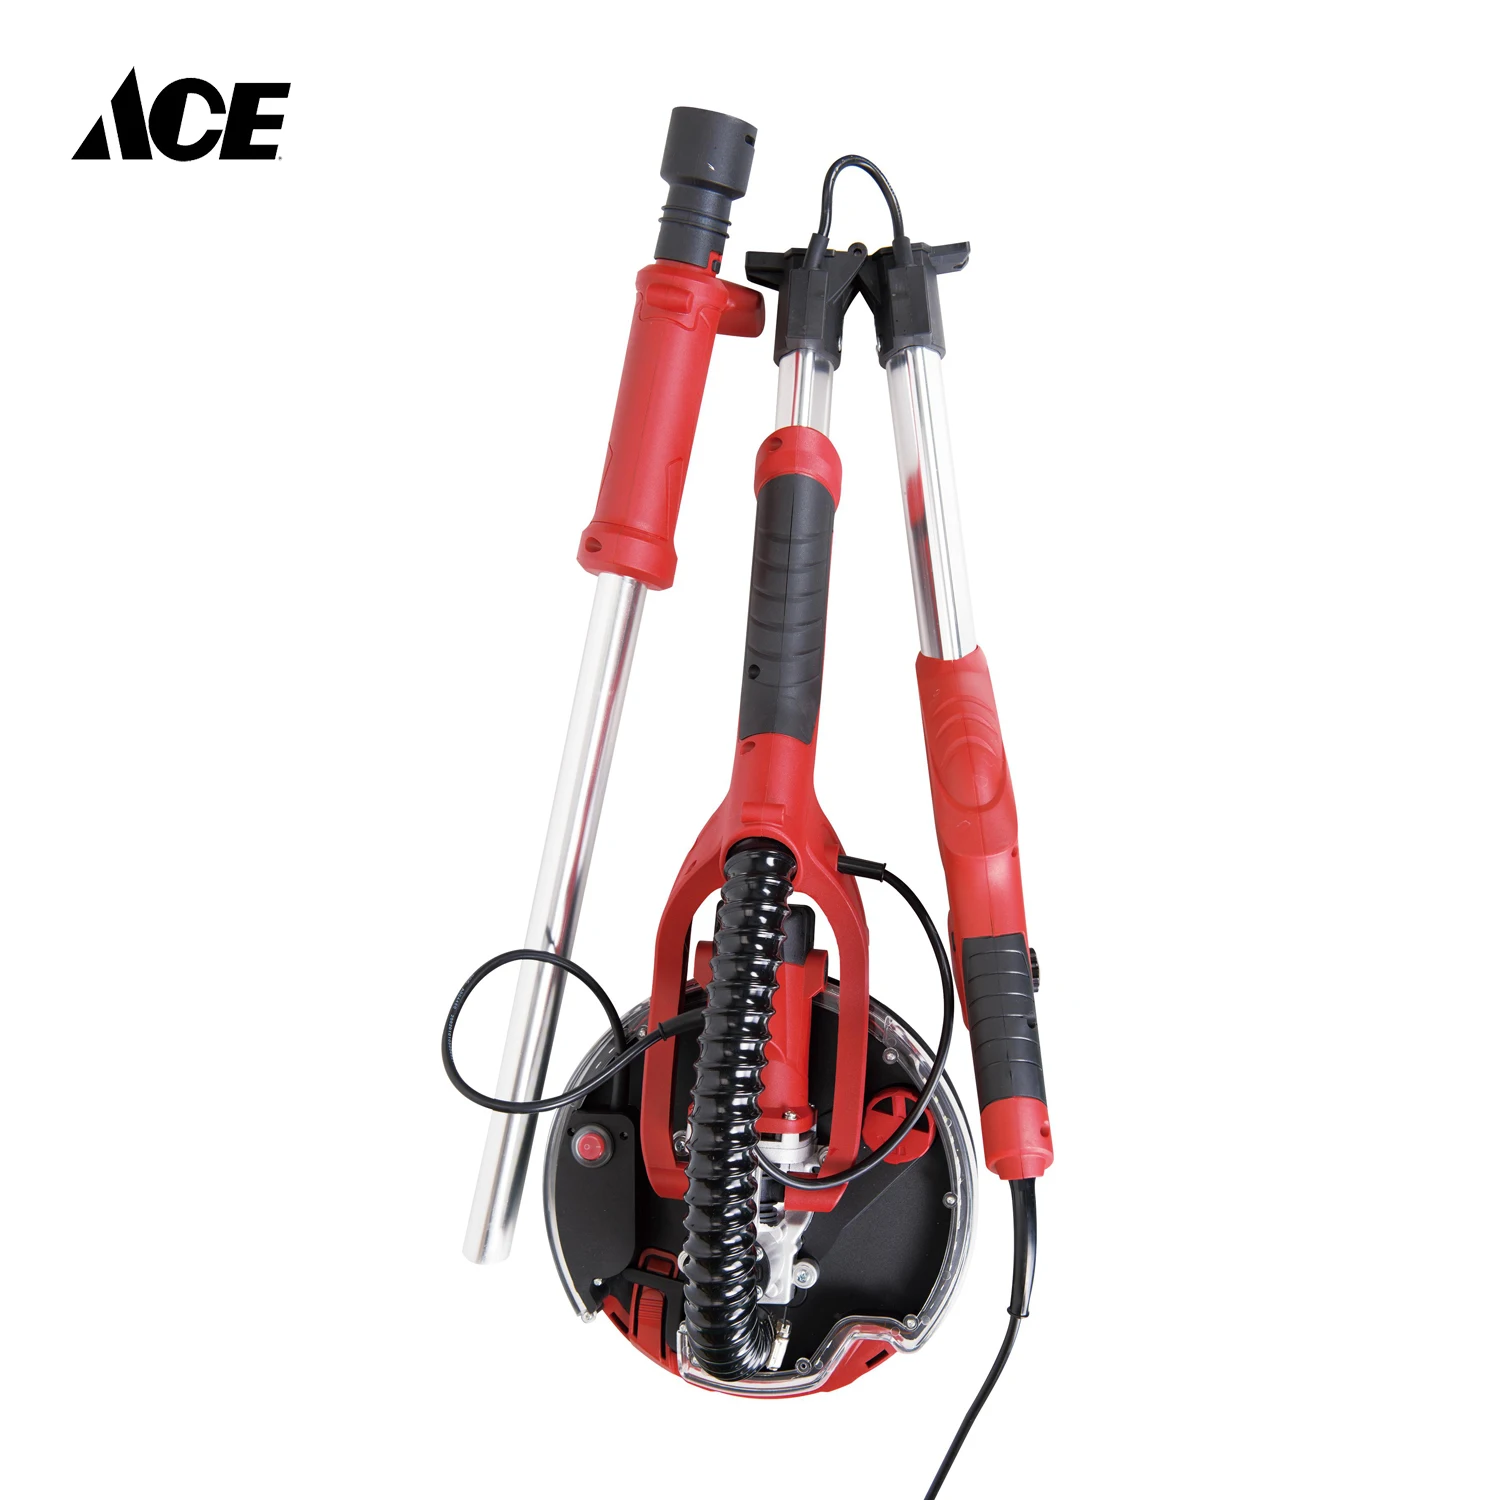 Plaster walls and Ceilings Electric Drywall Sander